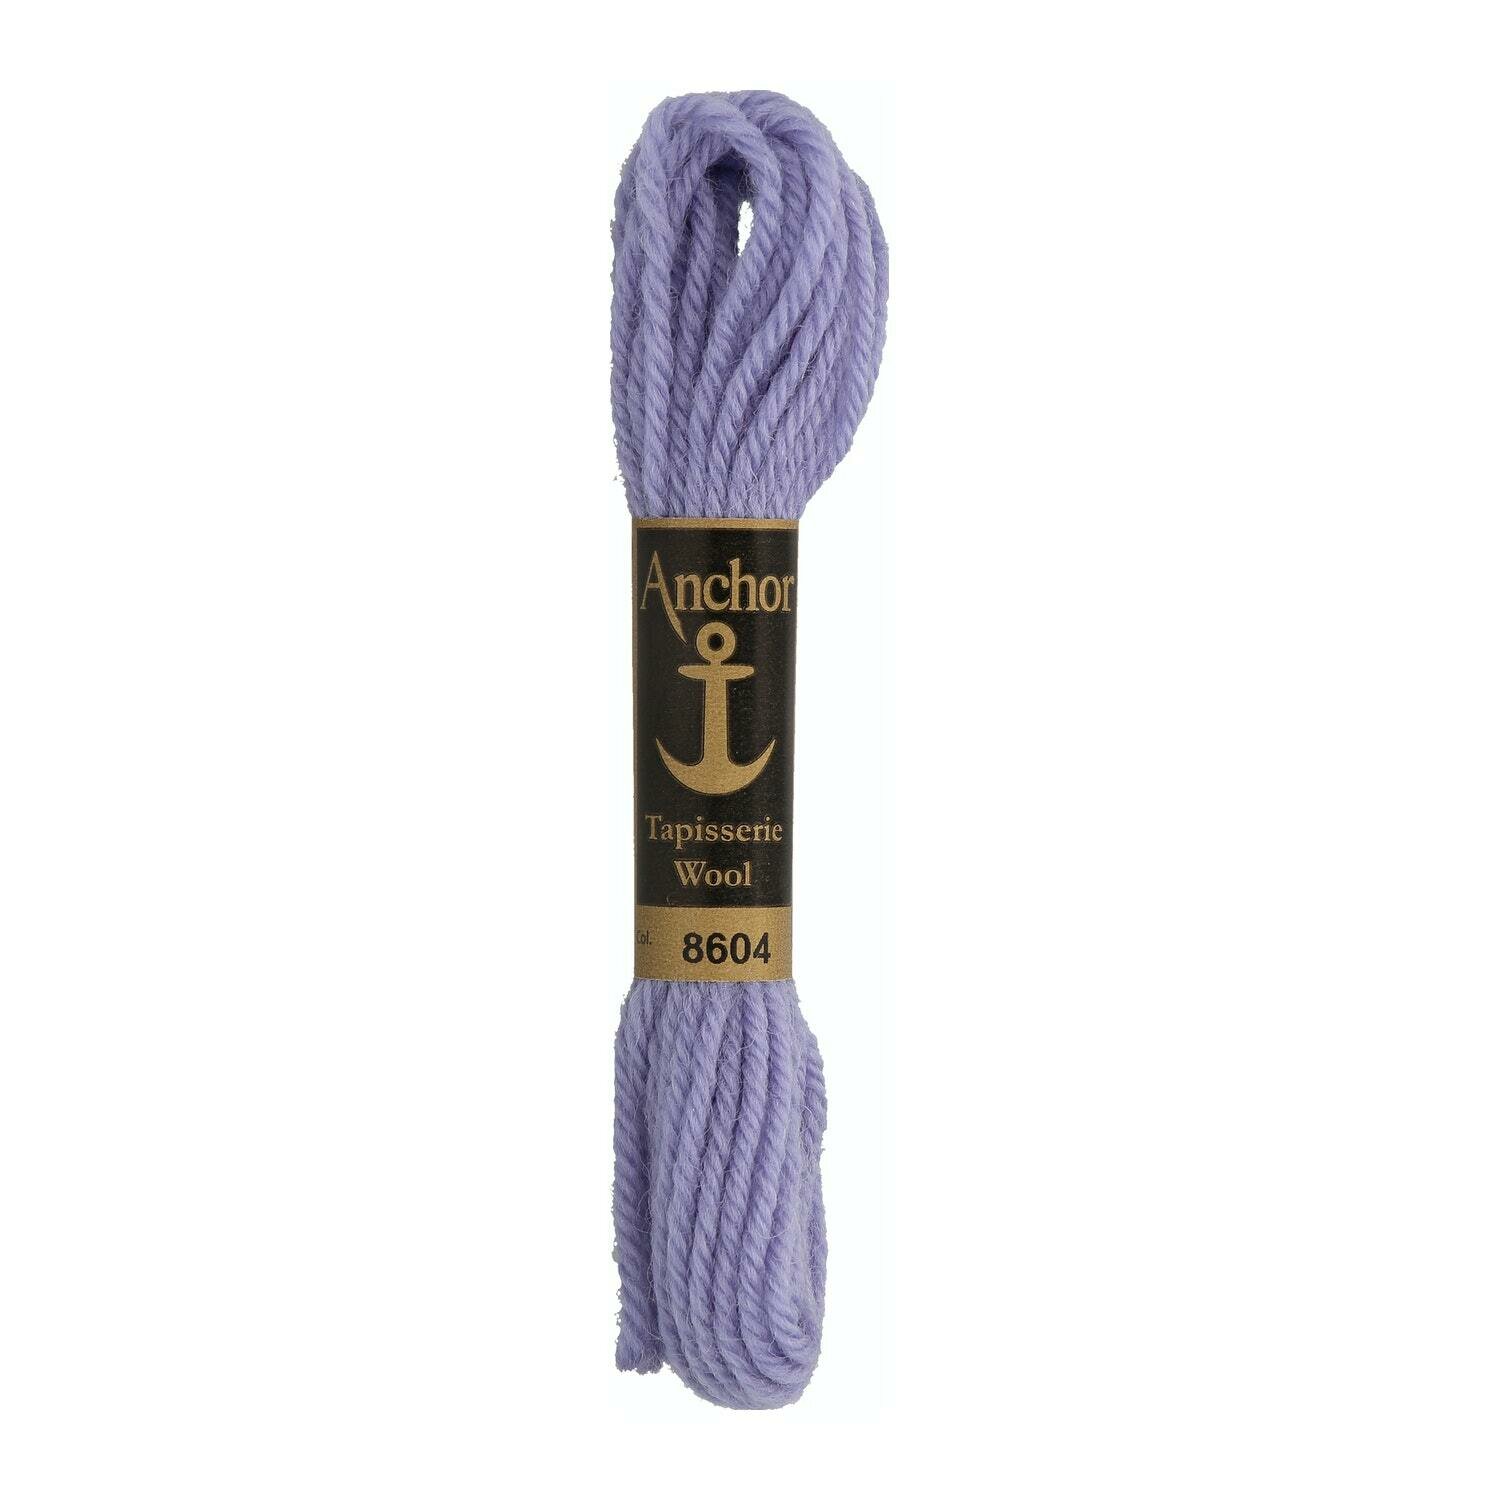 Anchor Tapisserie Wool #  08604